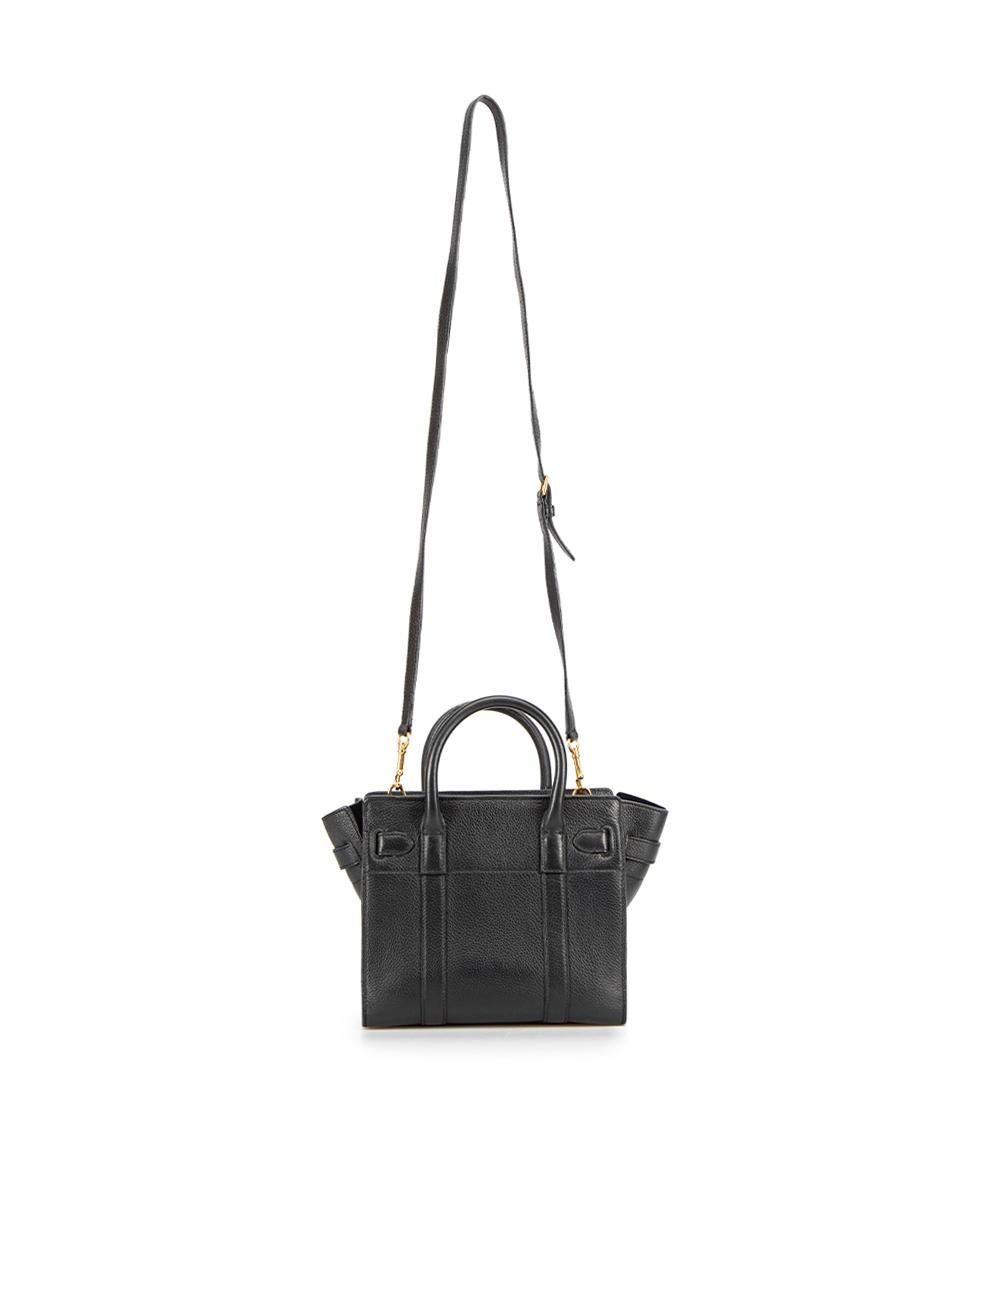 Mulberry Women's Black Leather Small Zipped Bayswater Bag In Good Condition In London, GB